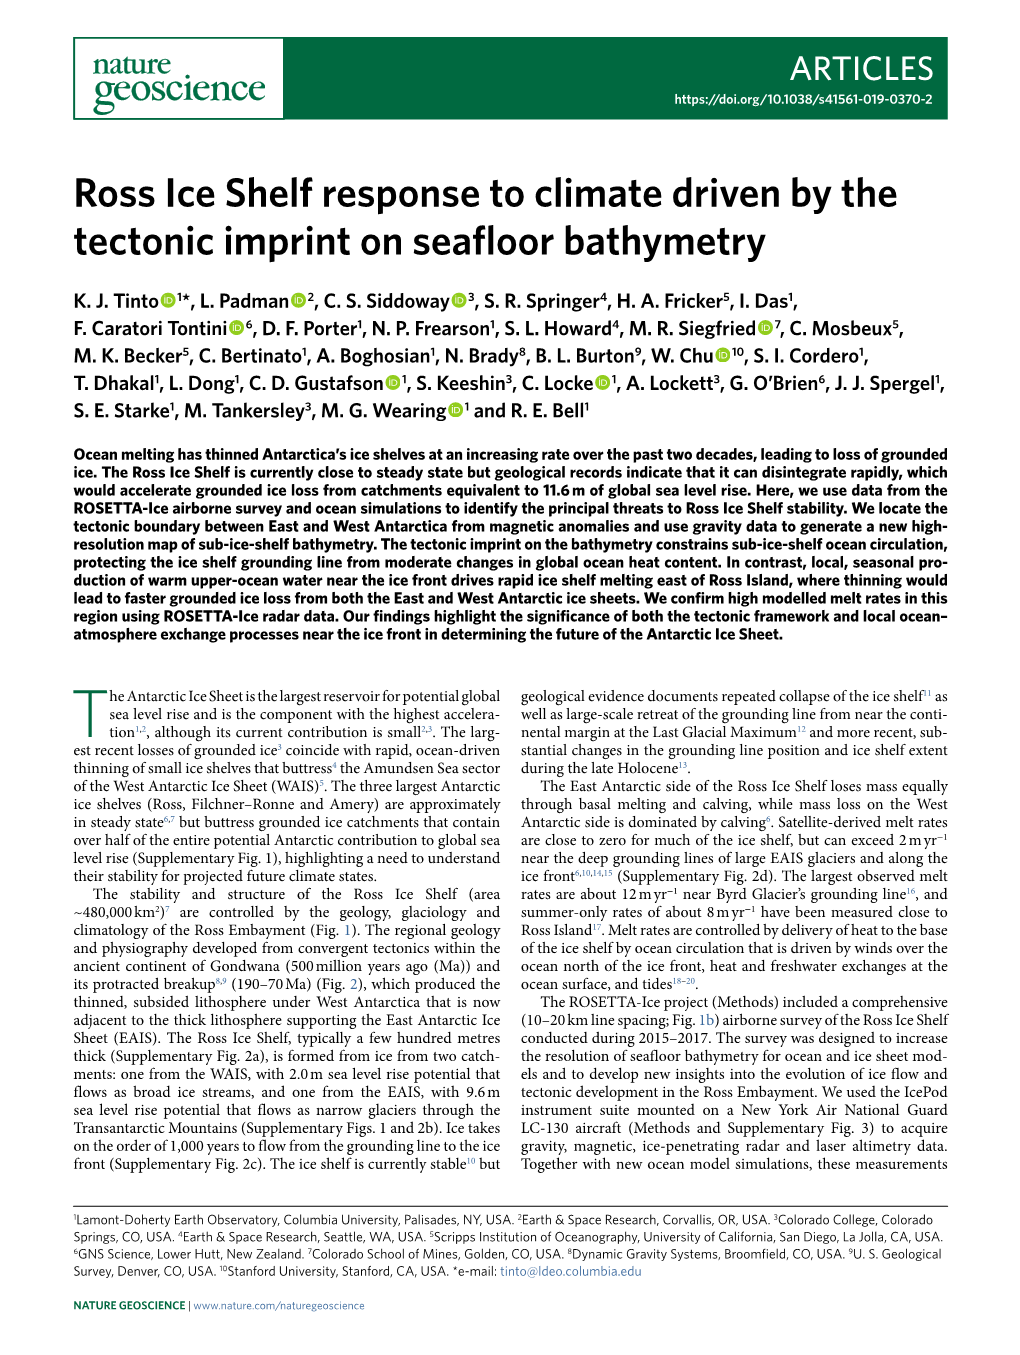 Ross Ice Shelf Response to Climate Driven by the Tectonic Imprint on Seafloor Bathymetry